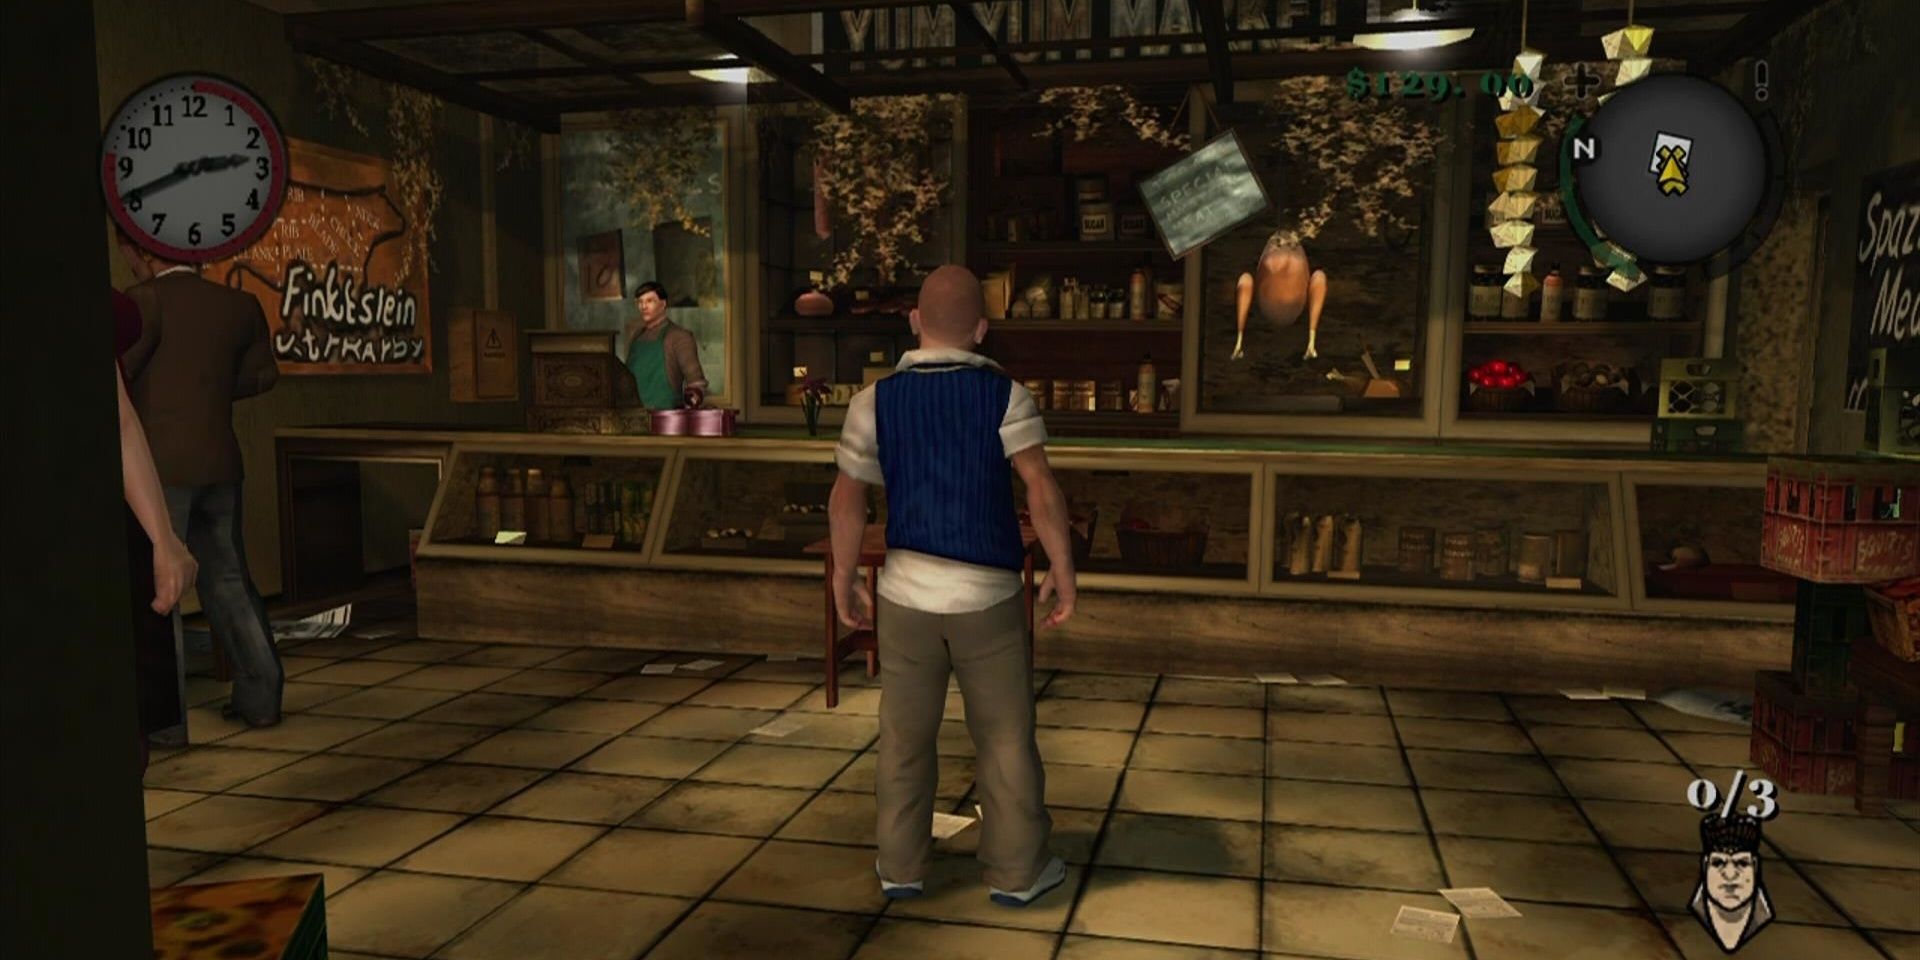 A screenshot showing gameplay from Bully: Scholarship Edition, Jimmy approaching shop